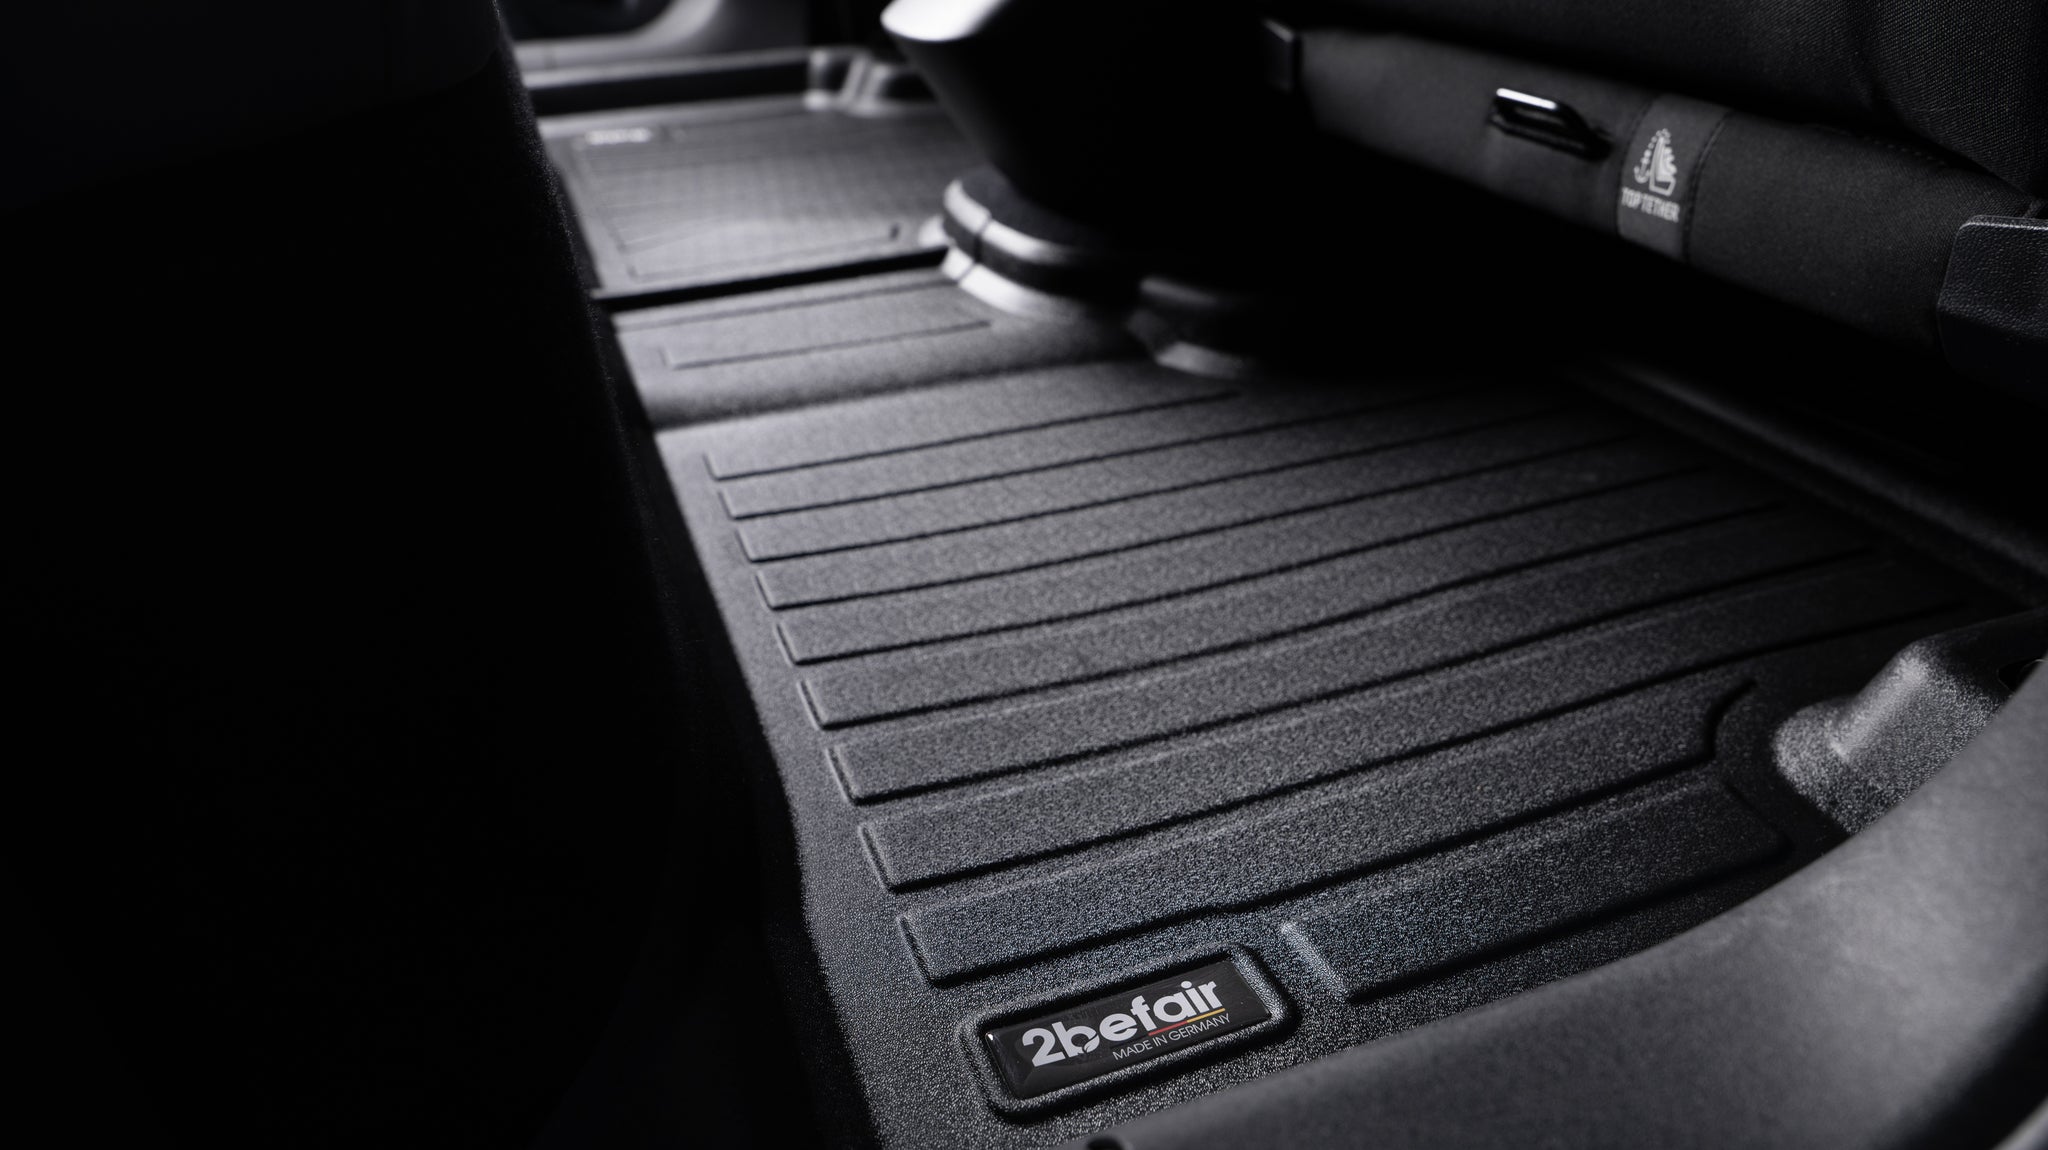 2befair rubber mats for the rear footwell for the Cupra Born